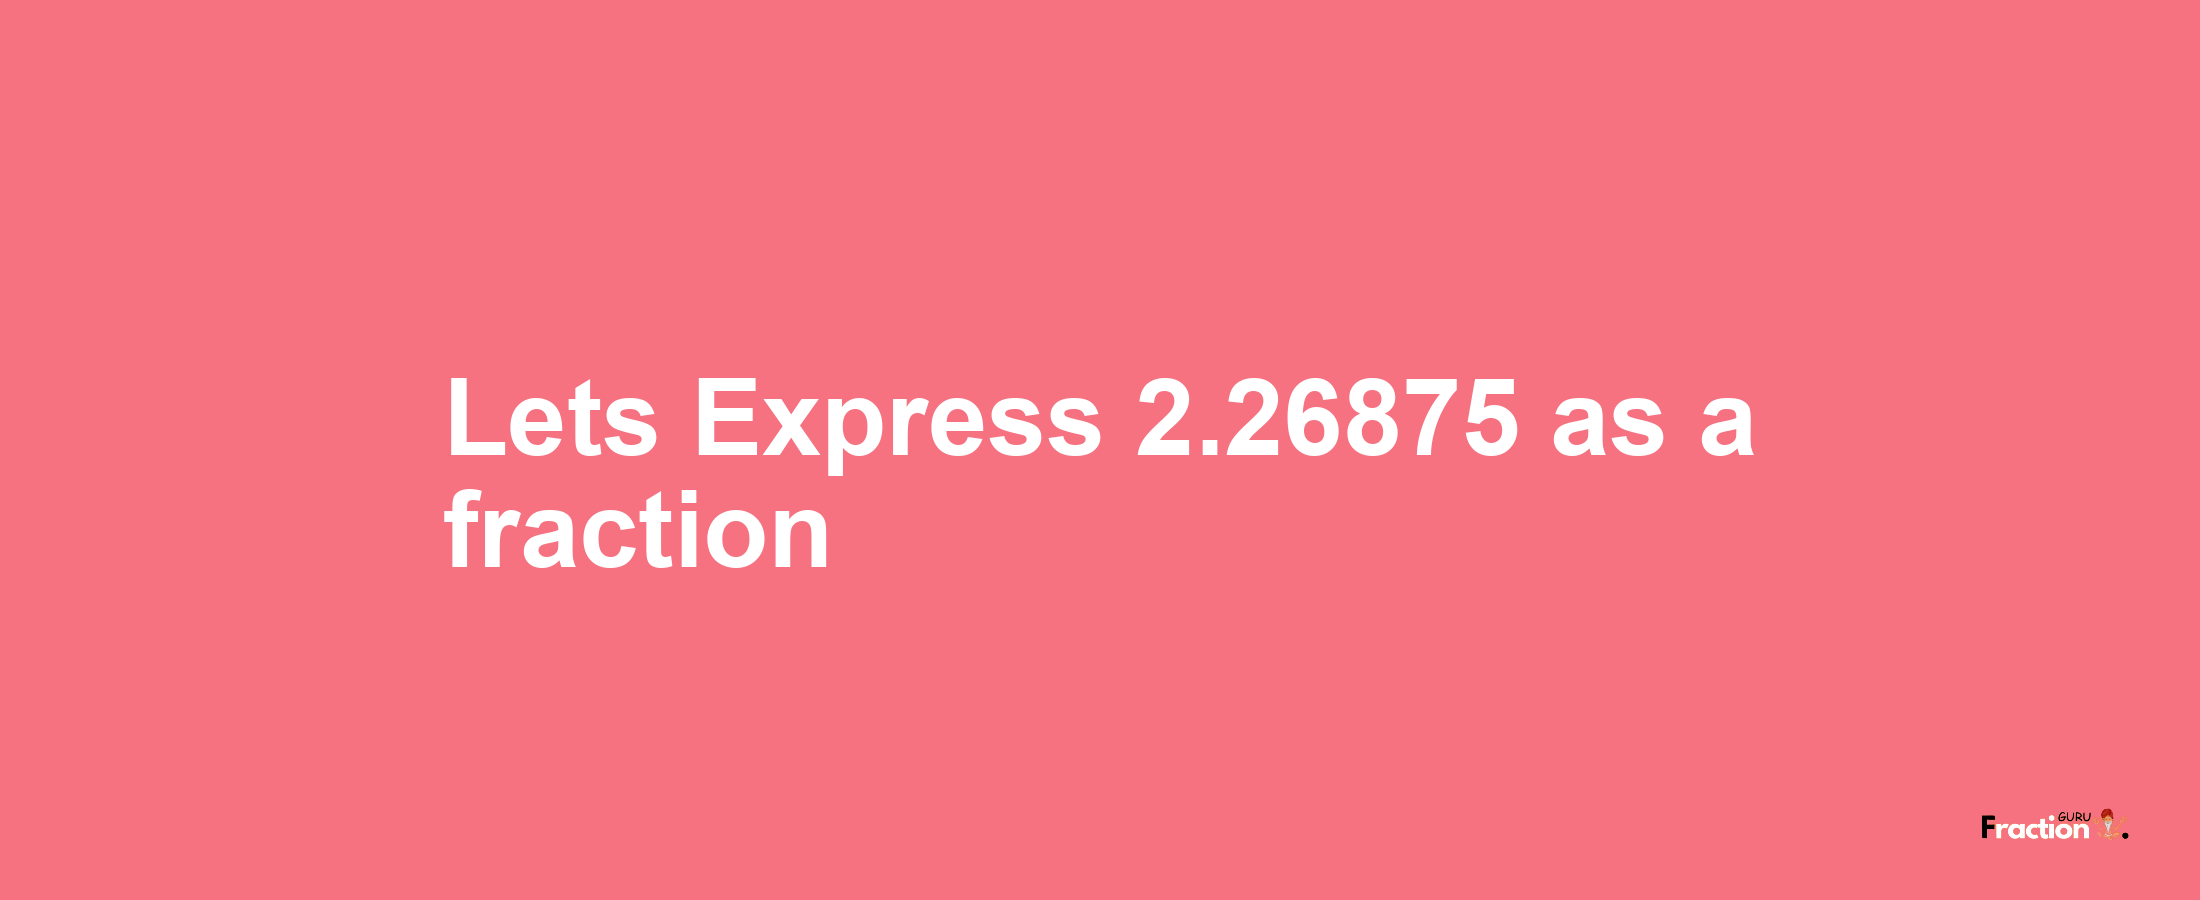 Lets Express 2.26875 as afraction